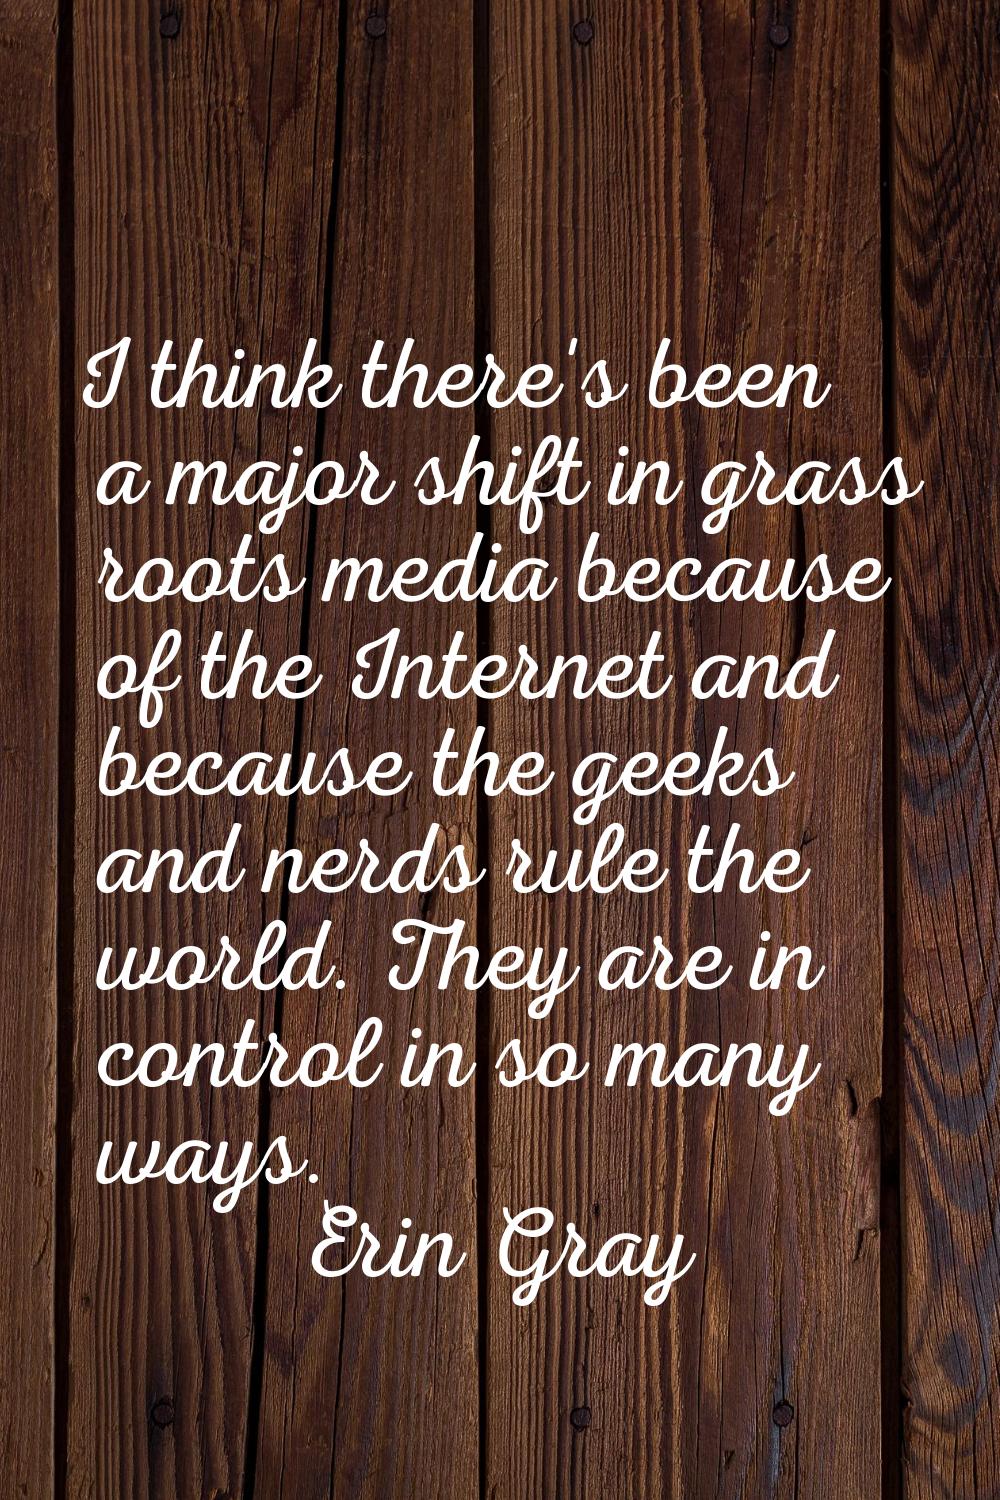 I think there's been a major shift in grass roots media because of the Internet and because the gee